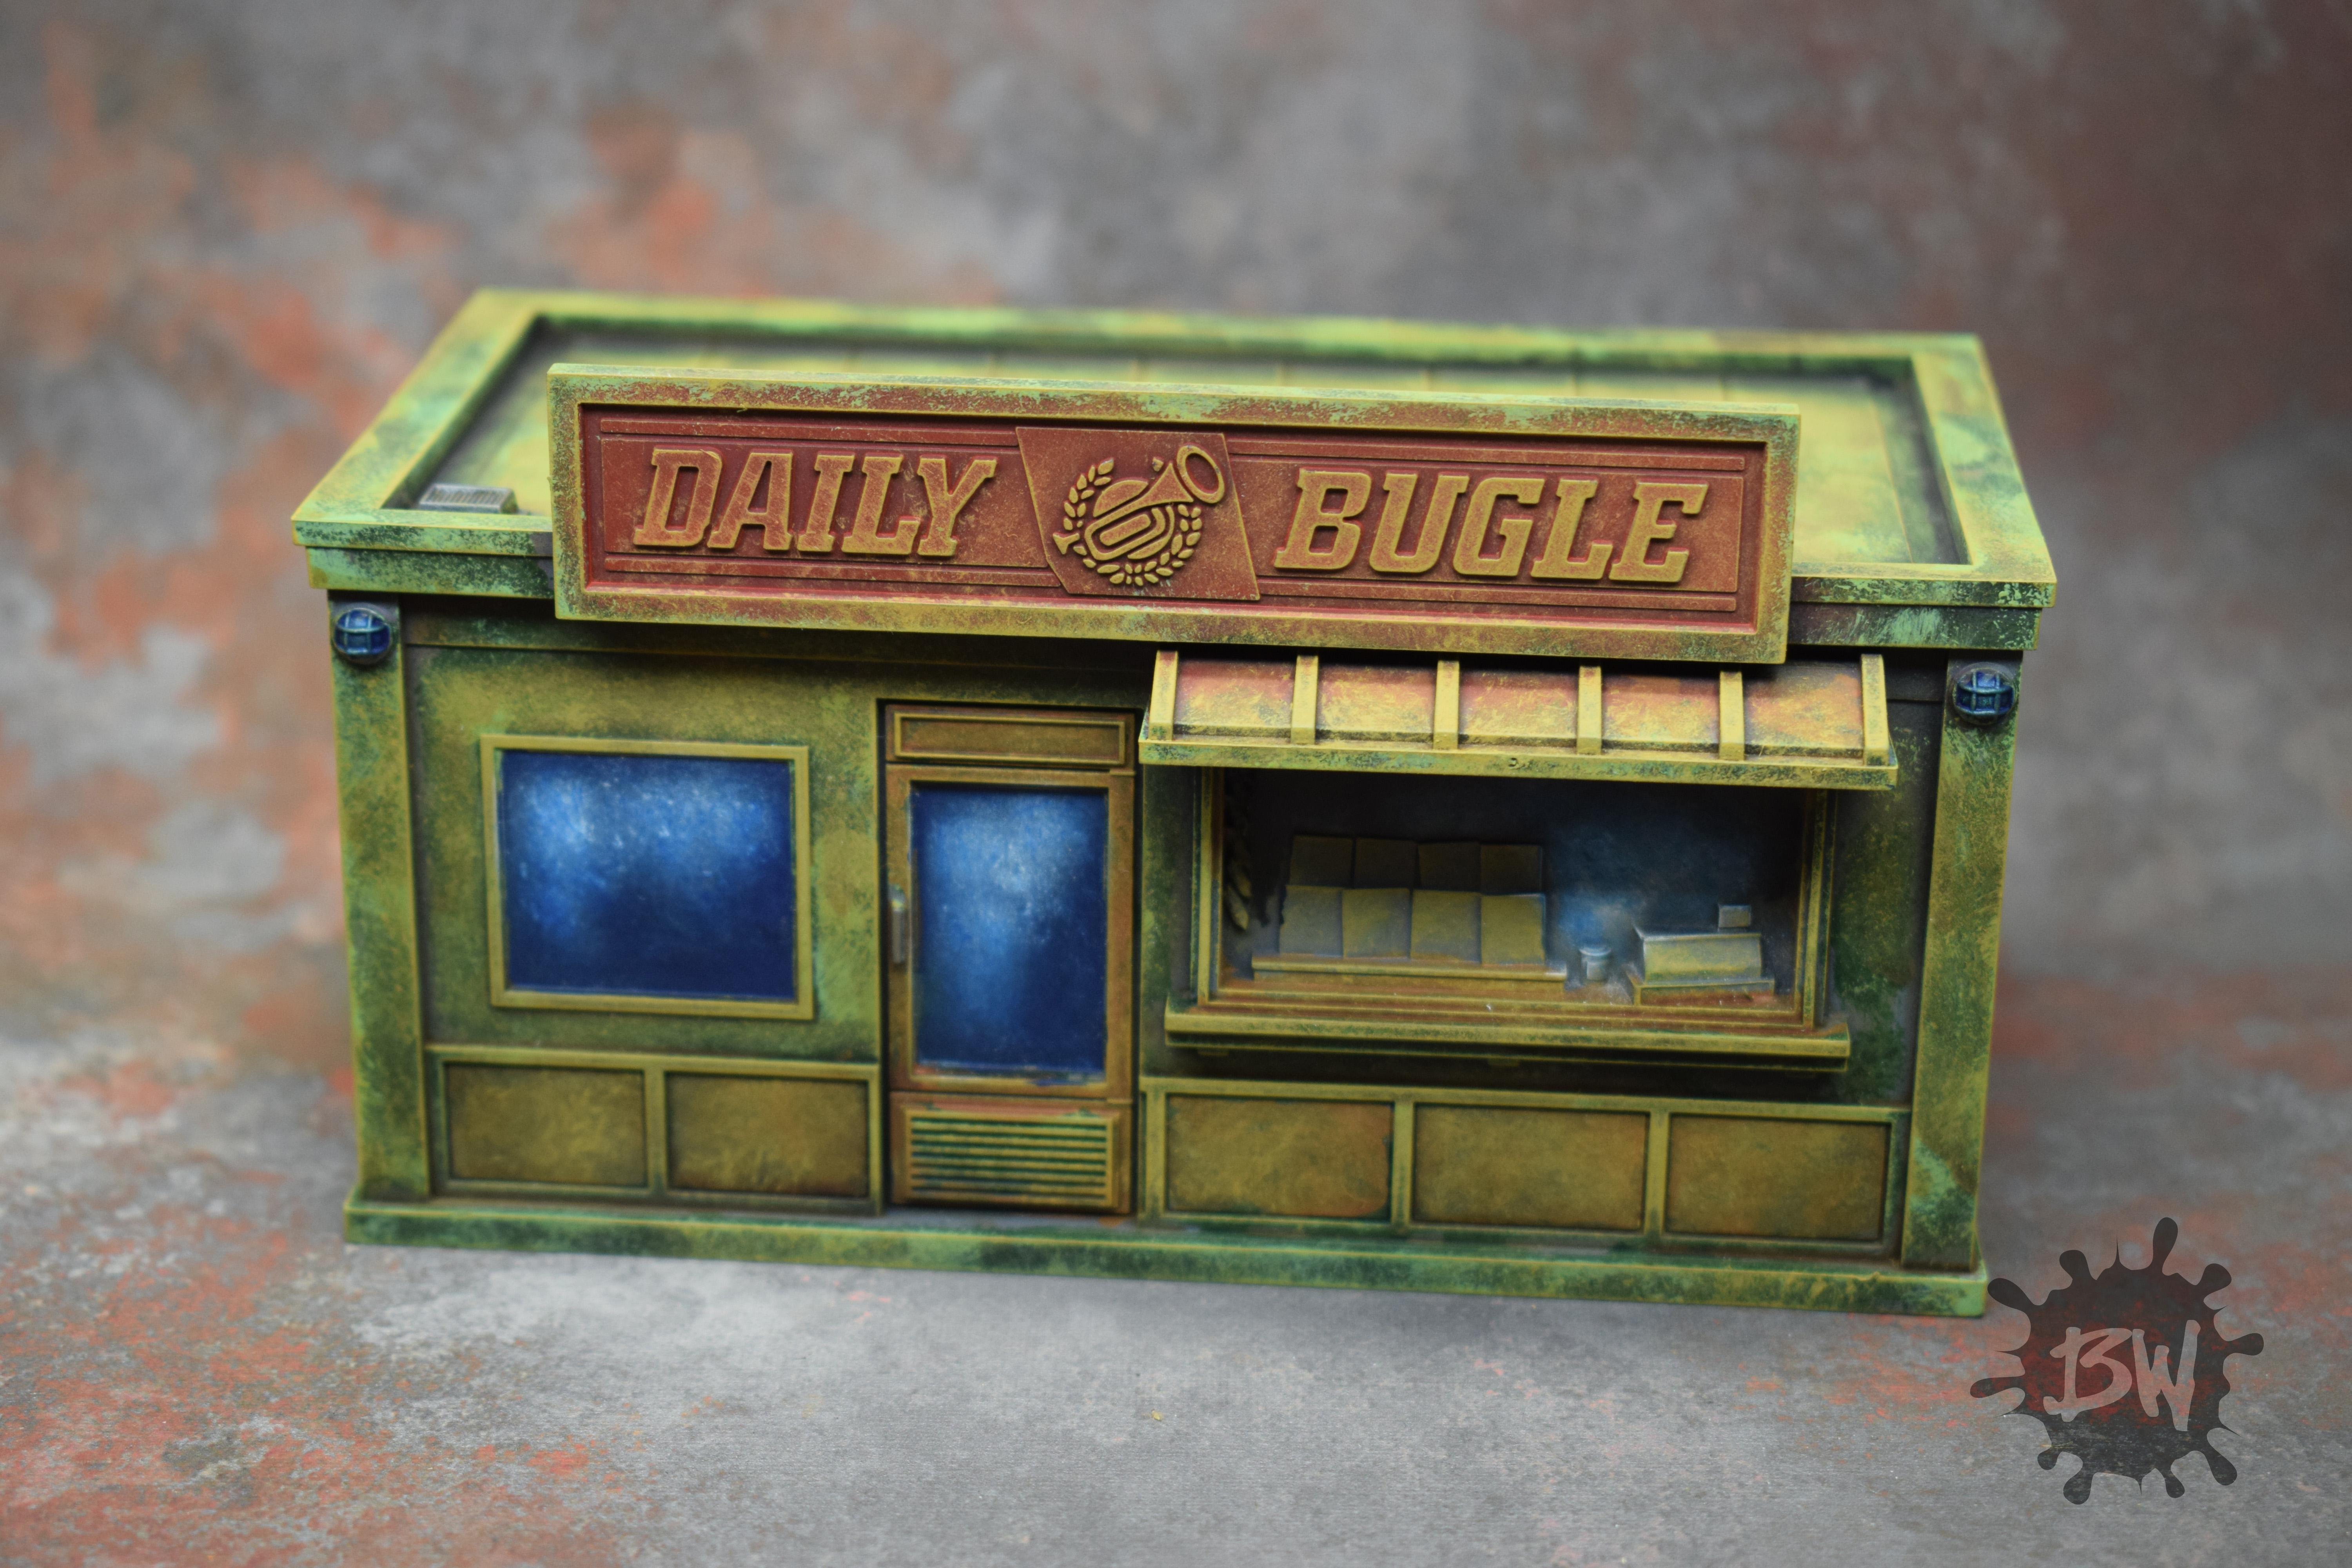 Amg, Atomic Mass Games, Bw, Daily Bugle Stand, Marvel, Marvel Crisis Protocol, Terrains